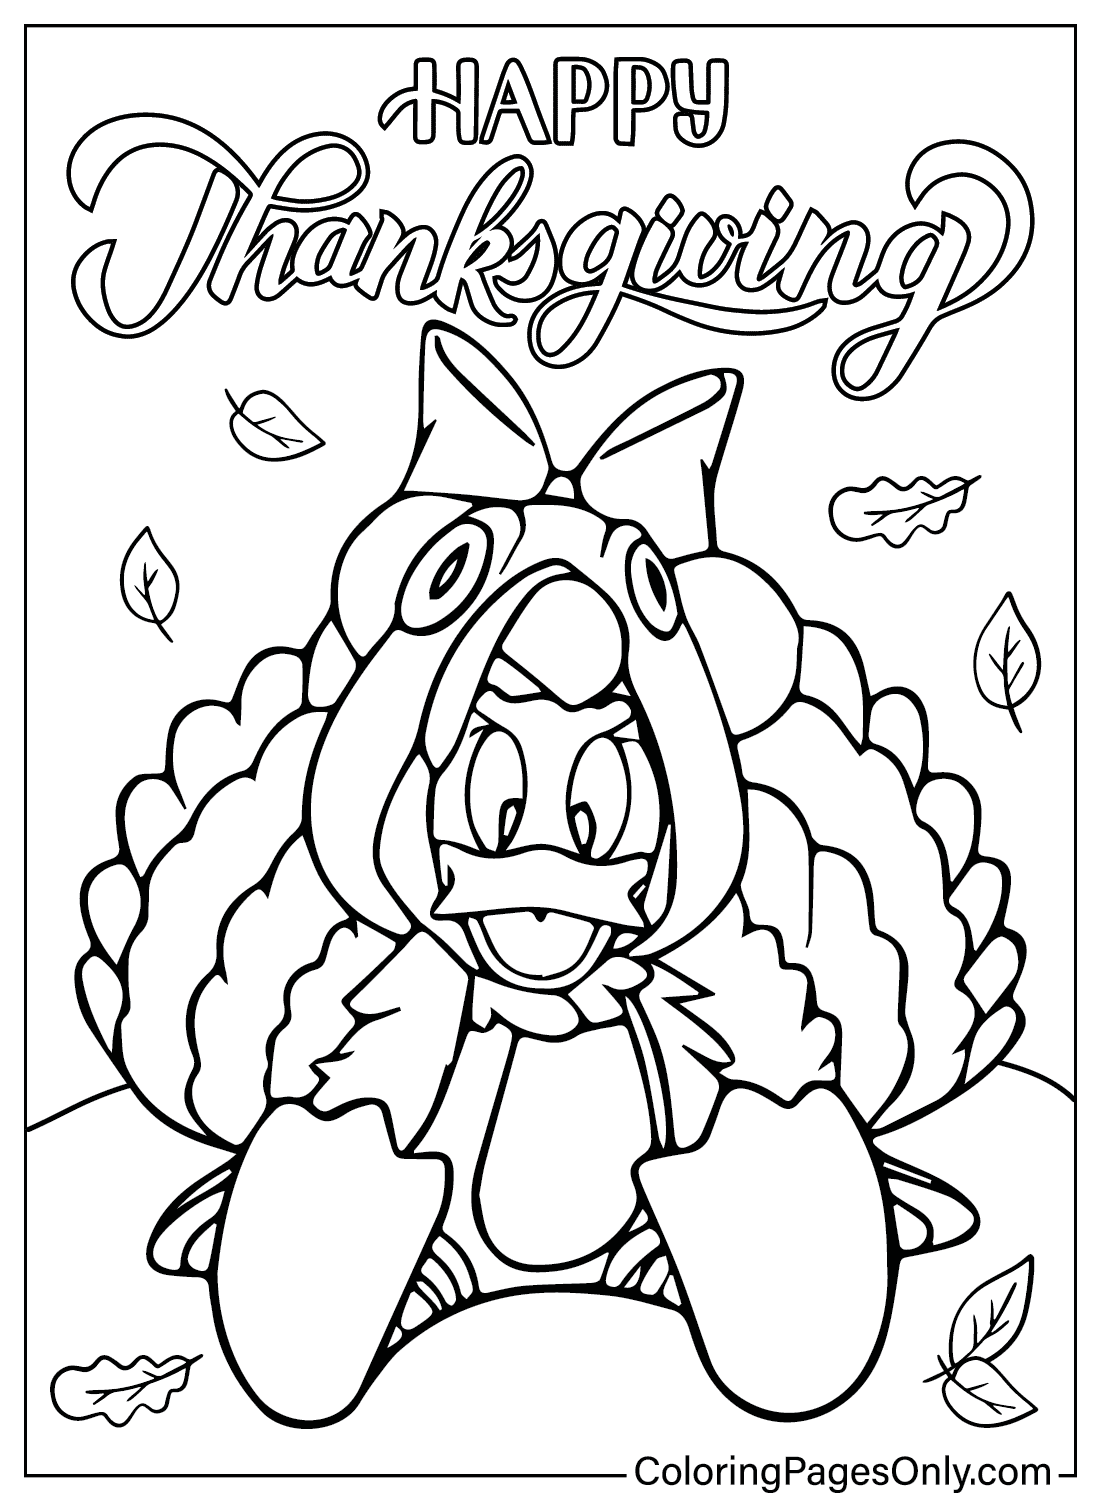 Disney Donald Thanksgiving Coloring Page from Disney Thanksgiving